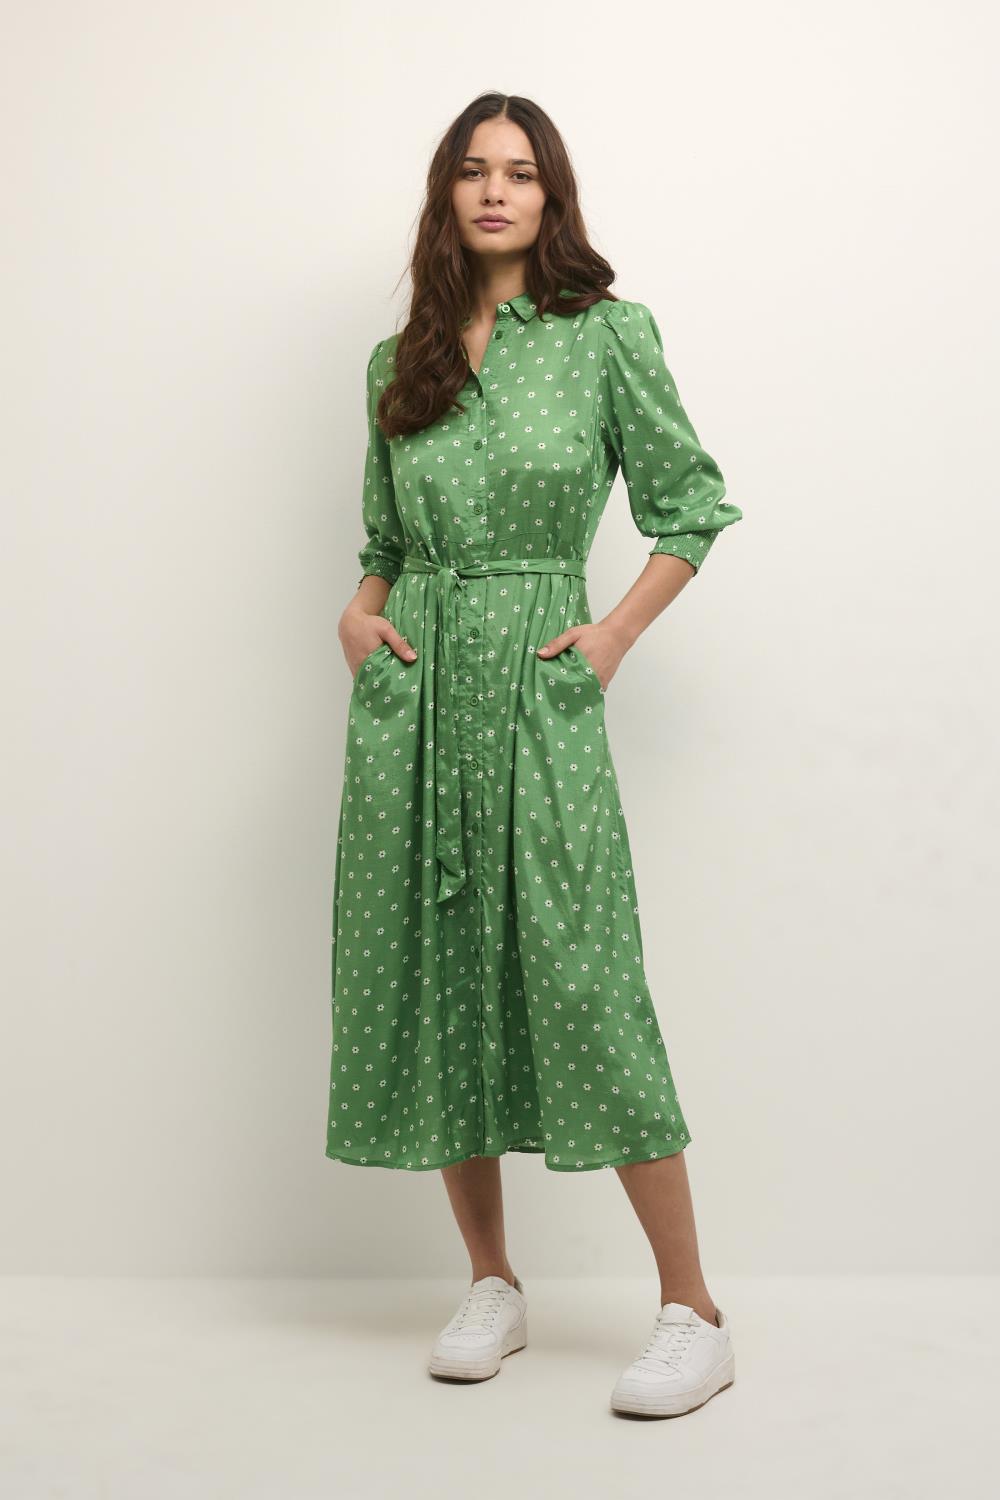 gallery-7591-for-10506539-bright green